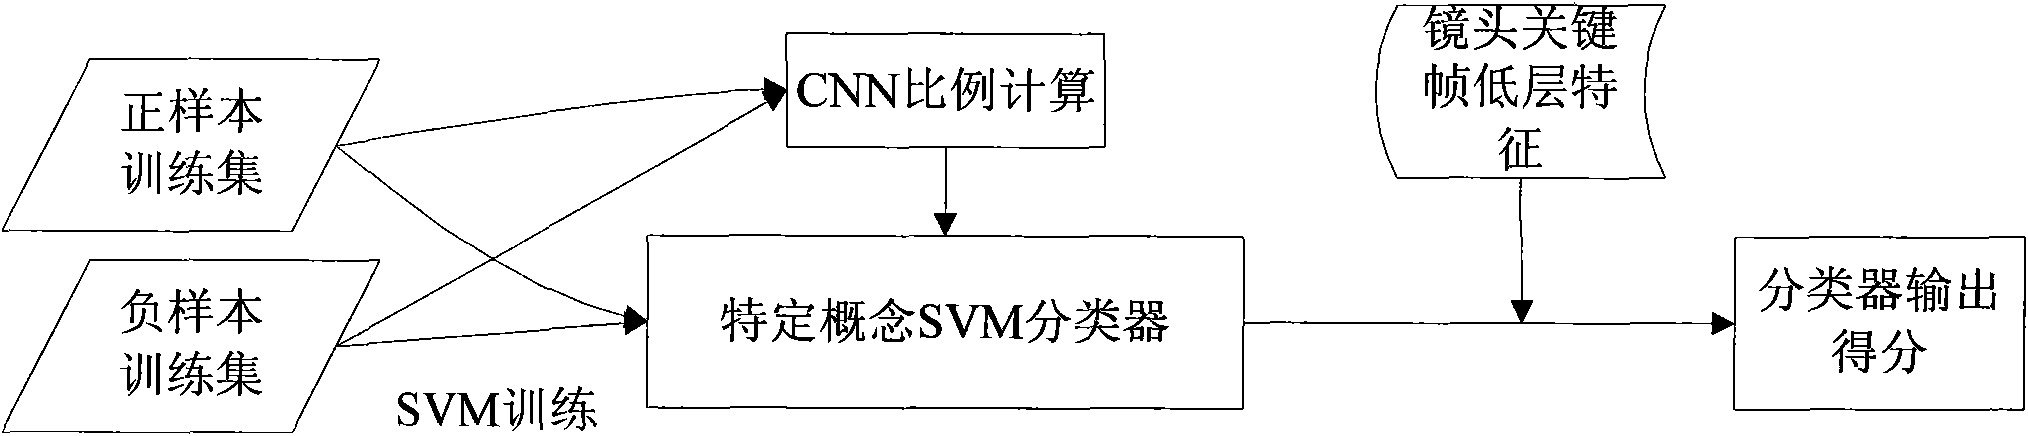 Video high-level characteristic retrieval system and realization thereof